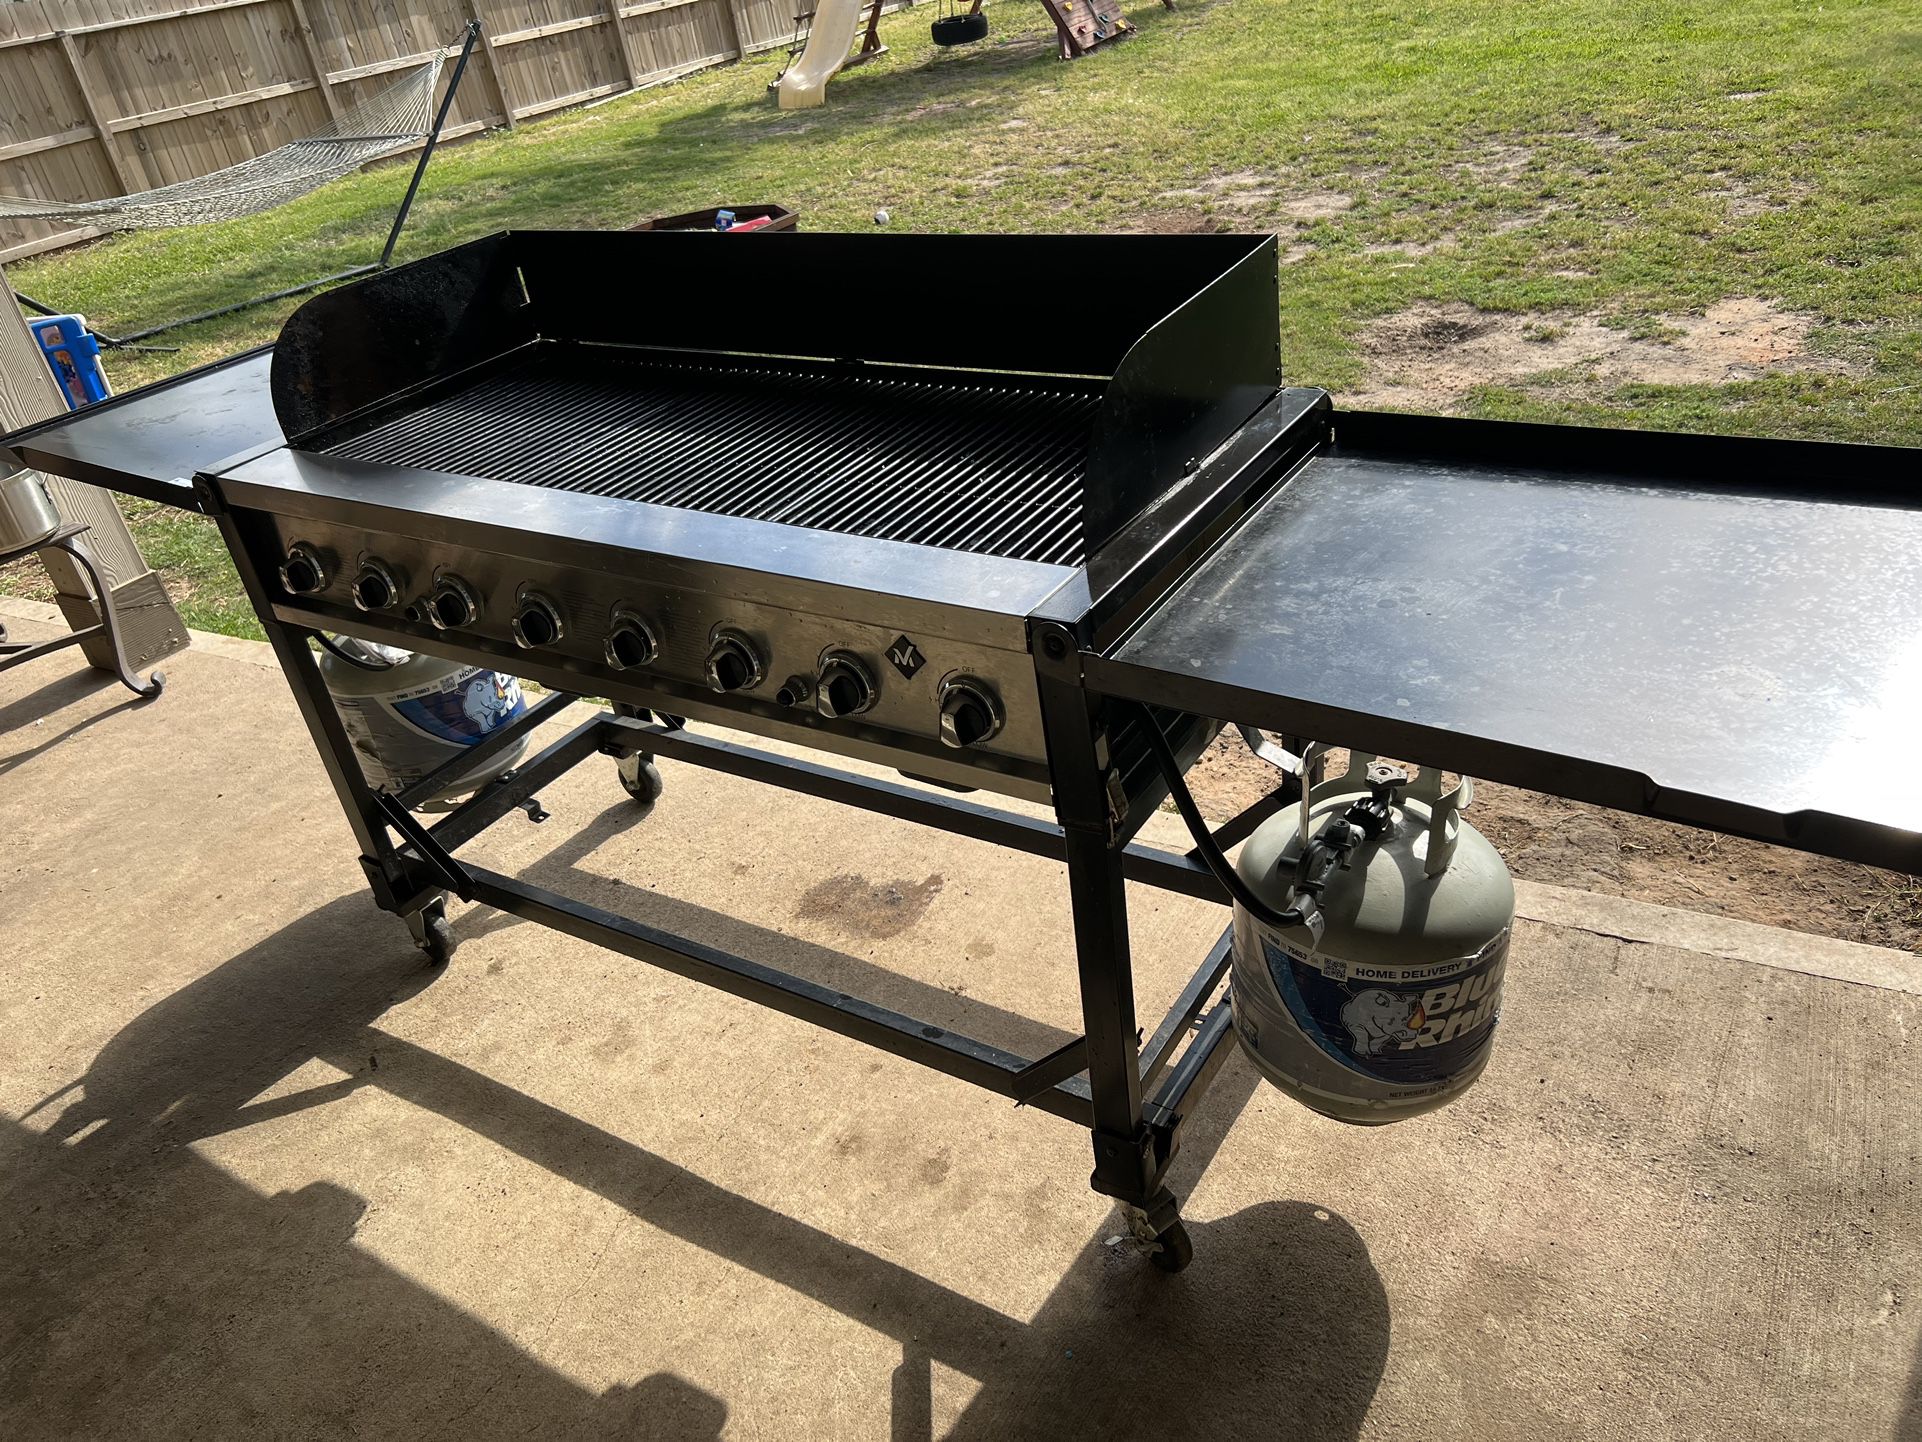 Members Mark Oven, Grill Fryer Cleaner for Sale in Rosemead, CA - OfferUp